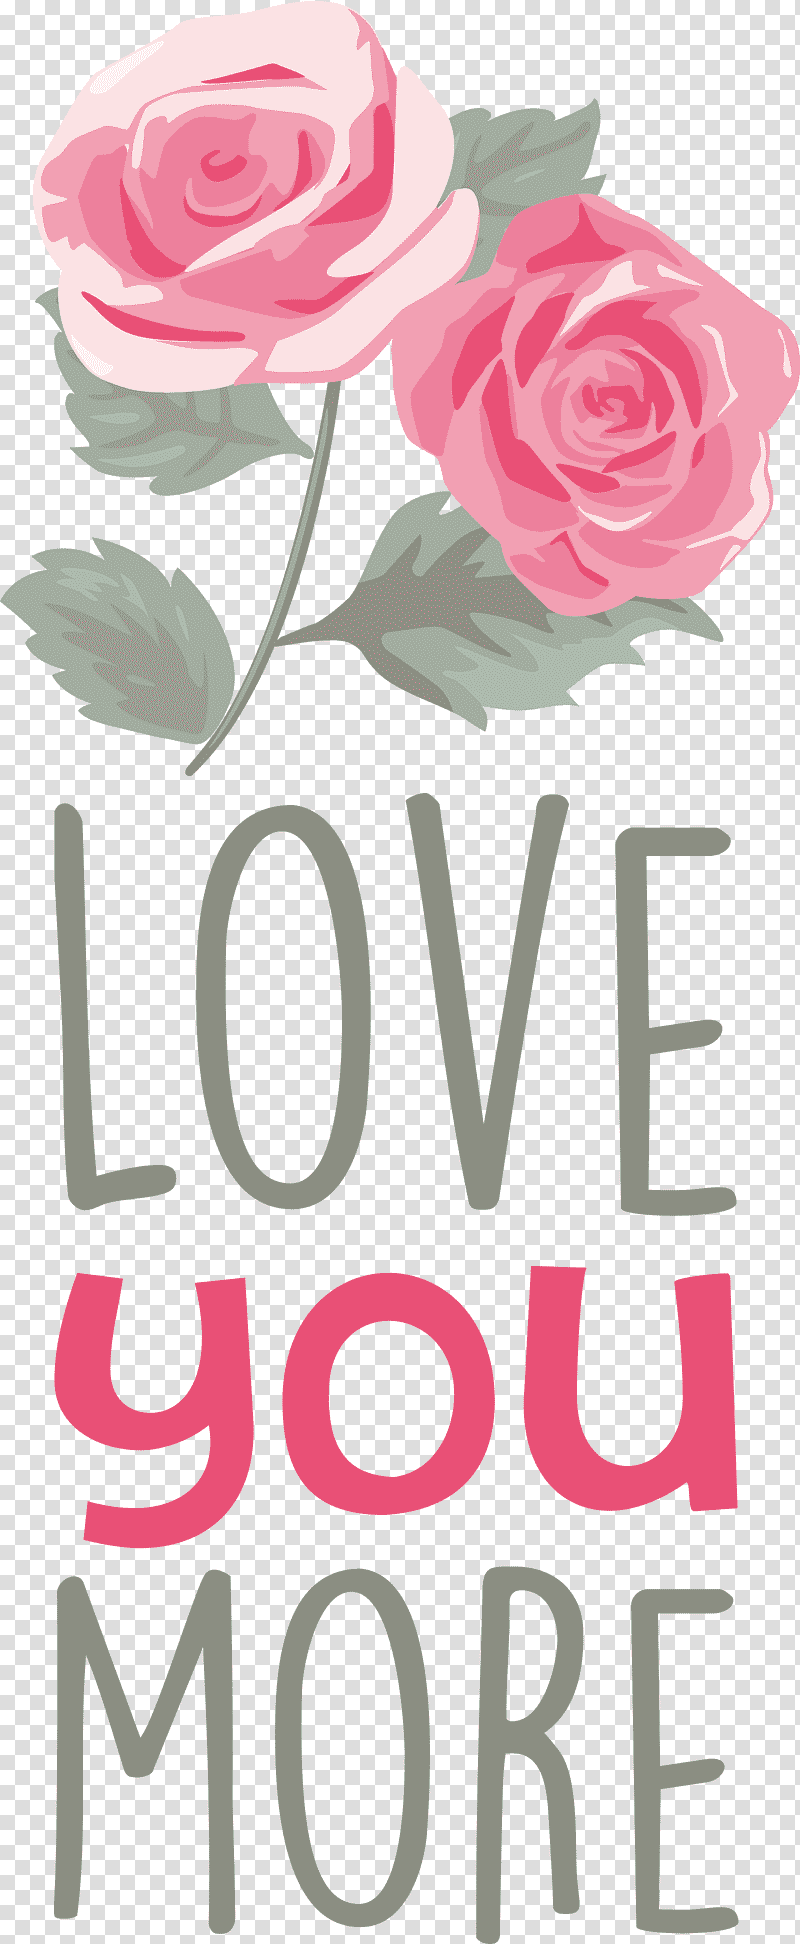 Love You More Valentines Day Valentine, Quote, Garden Roses, Flower, Multiflora Rose, Watercolor Painting, Drawing transparent background PNG clipart